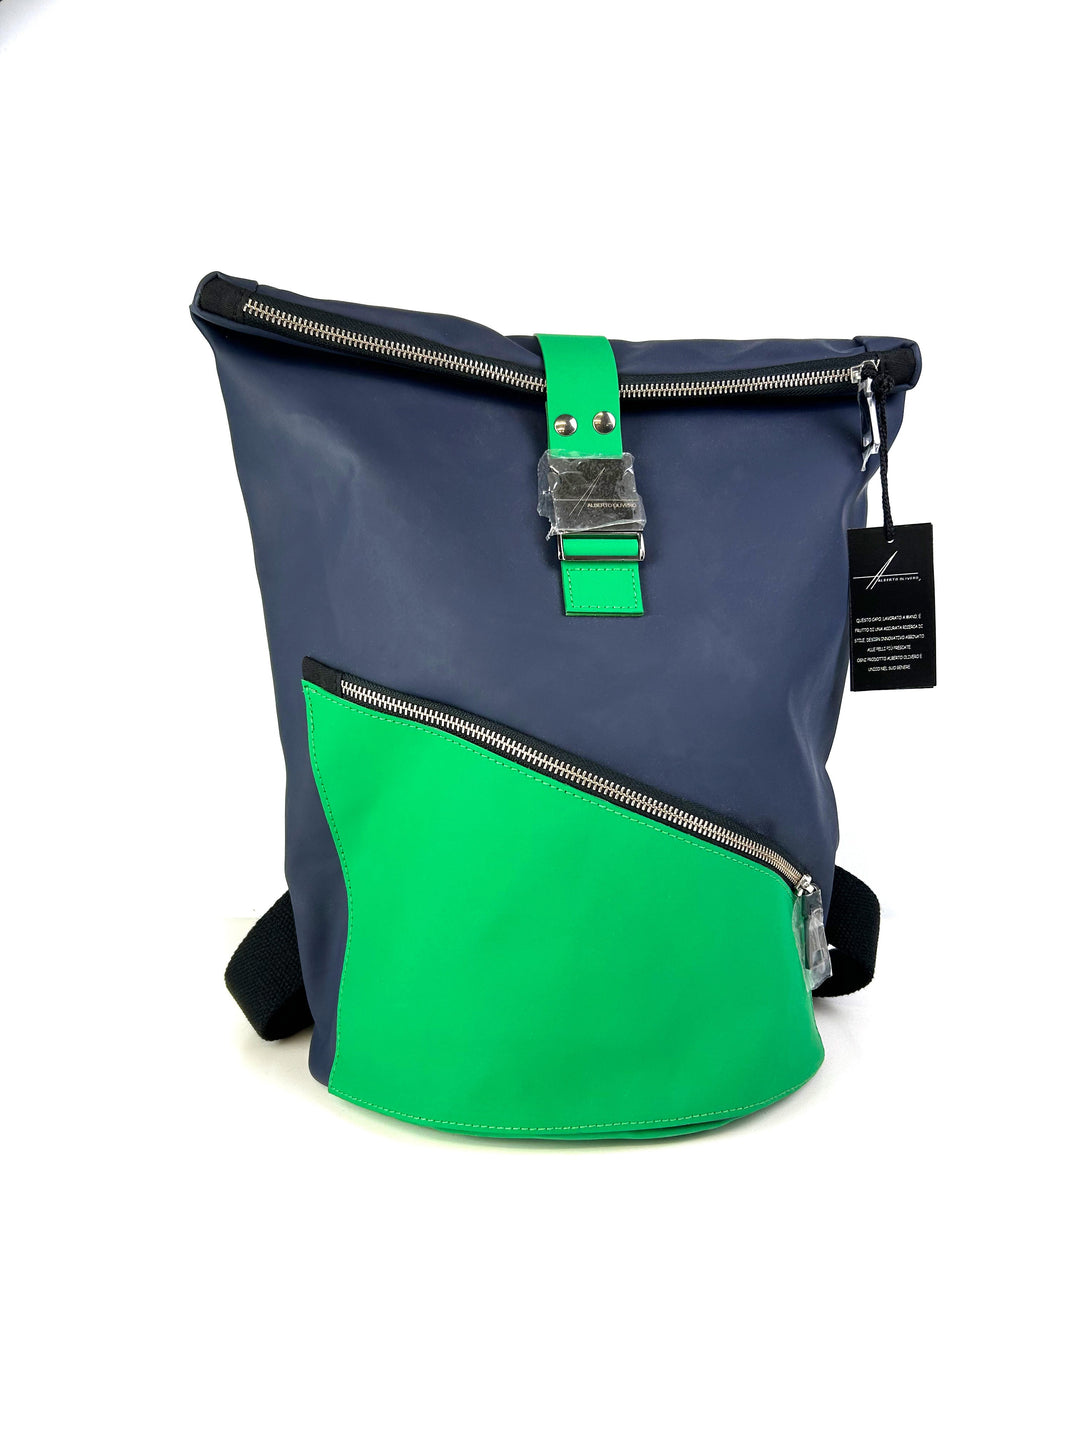 Modern blue and green backpack with zippers and a black tag on a white background